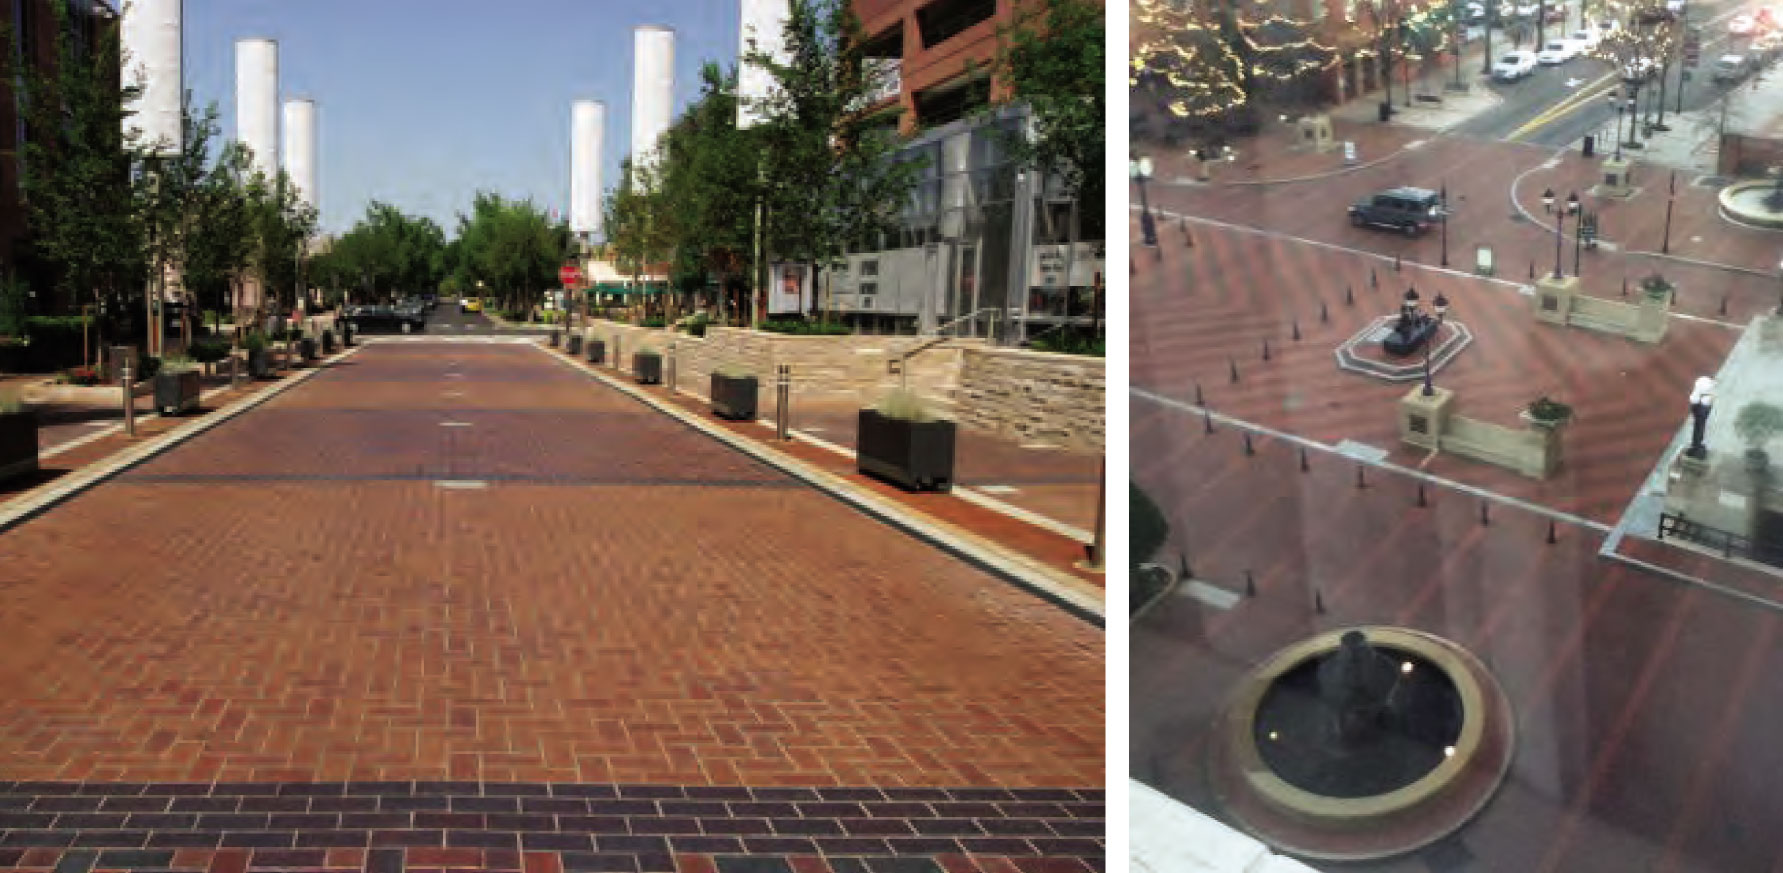 Reference photos for pedestrian plaza/street.